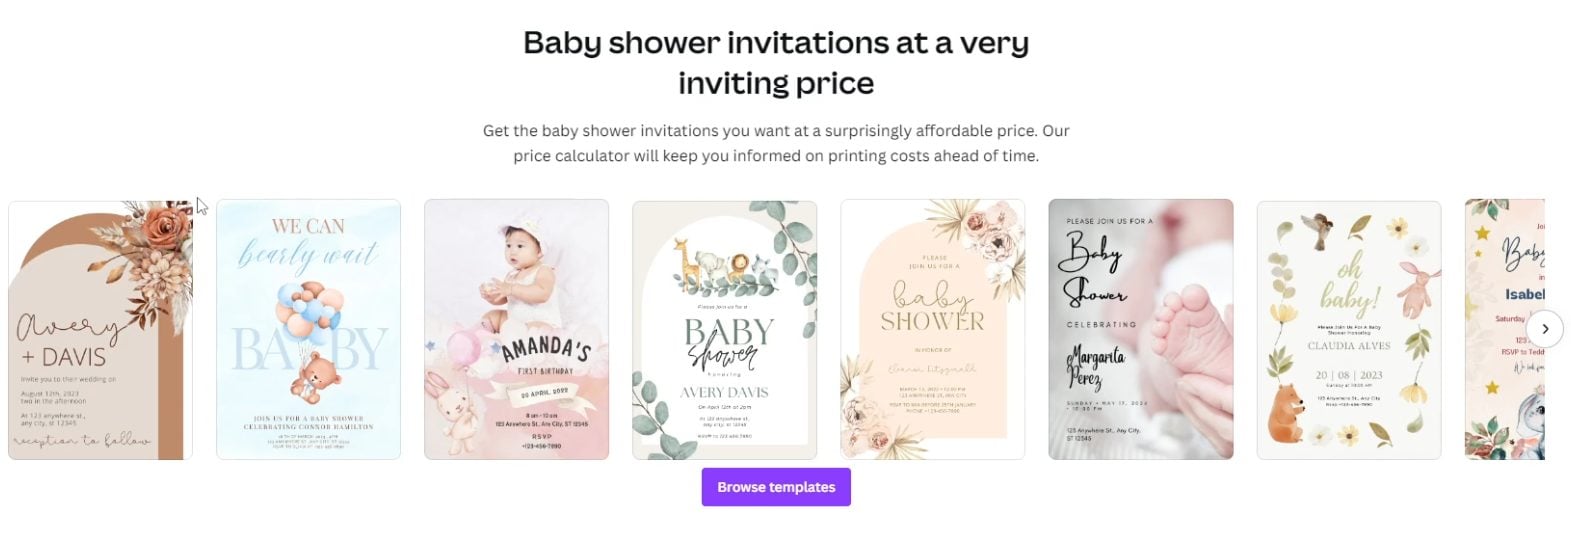 Canva baby shower